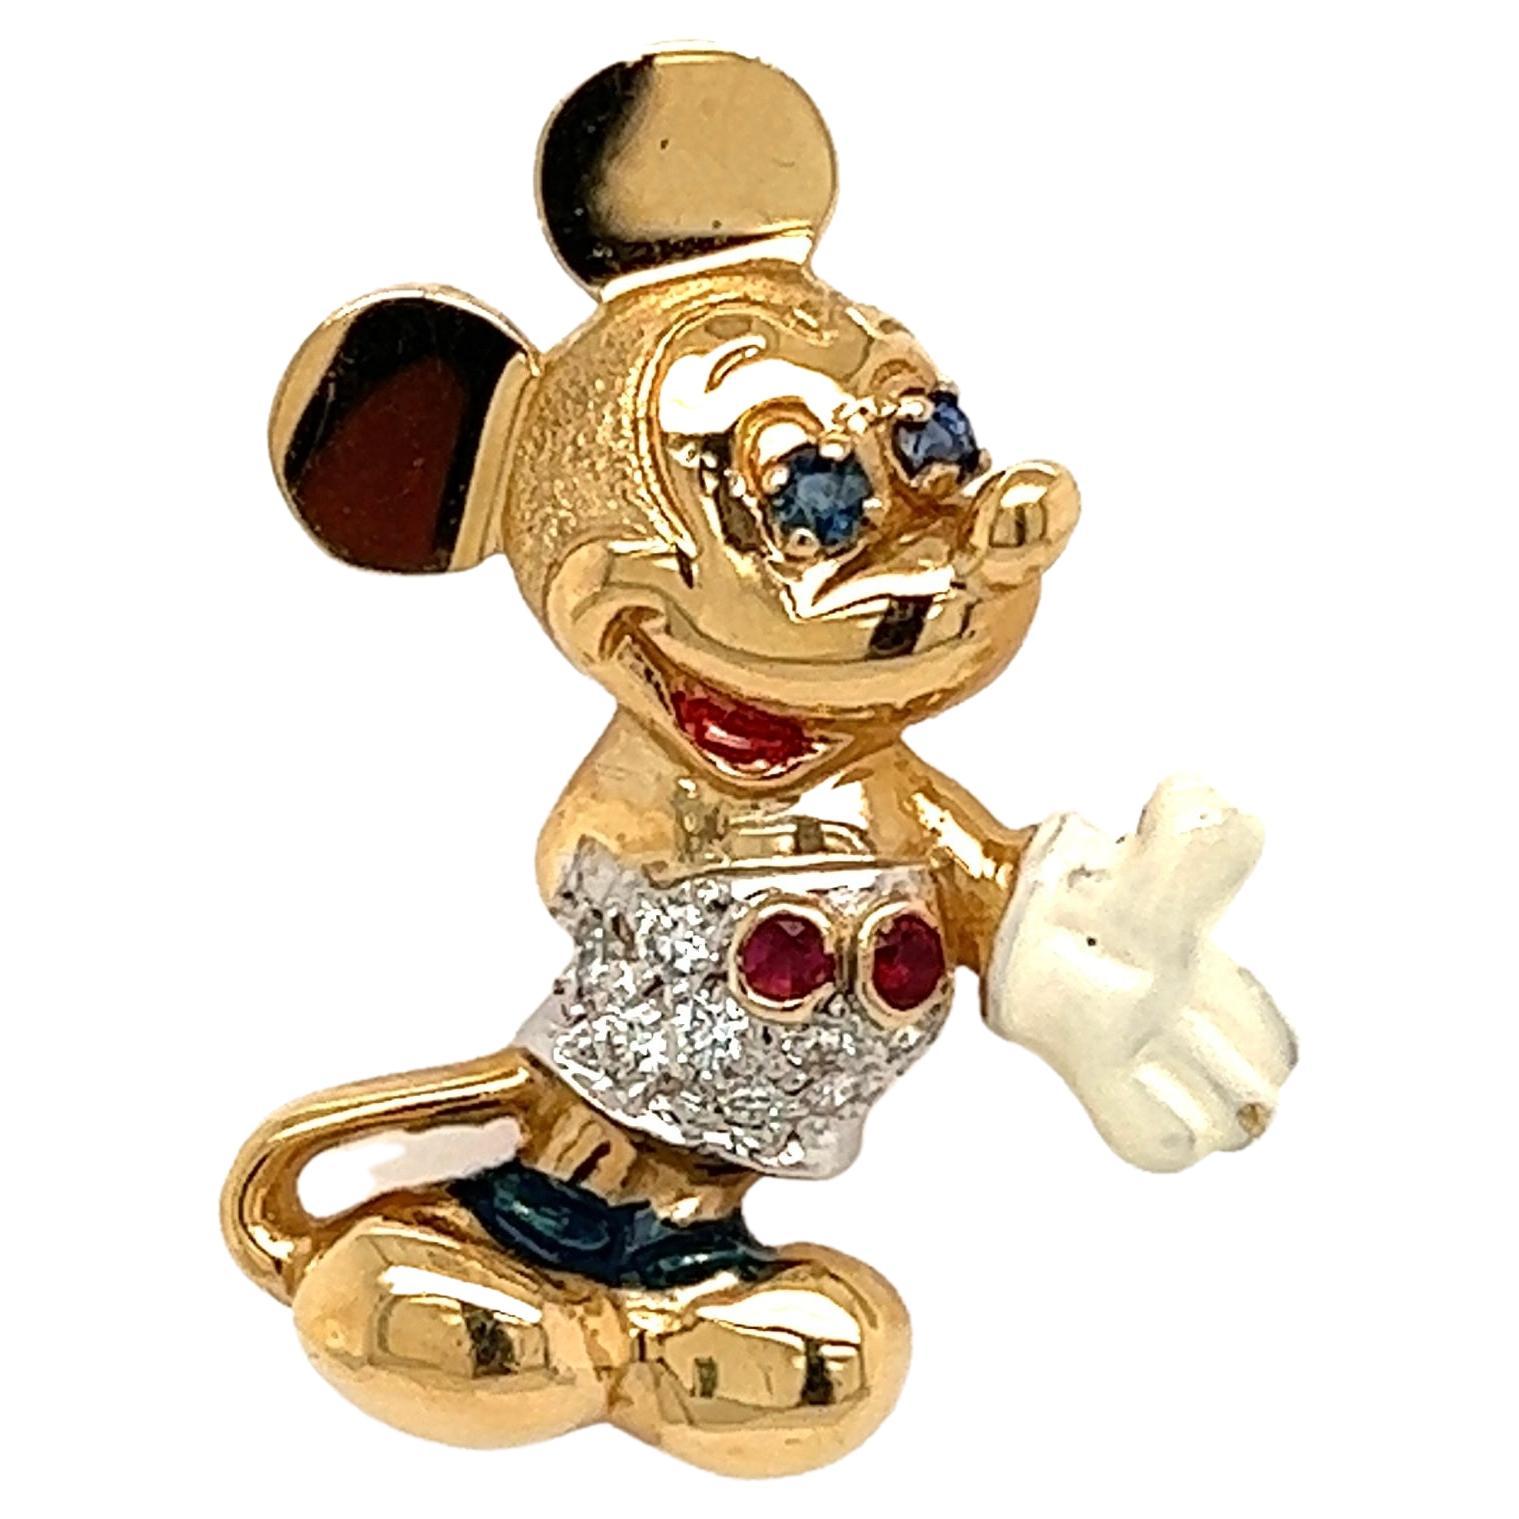 Disney Mickey Mouse Enamel Ruby and Sapphire Gold Charm Pendant Necklace